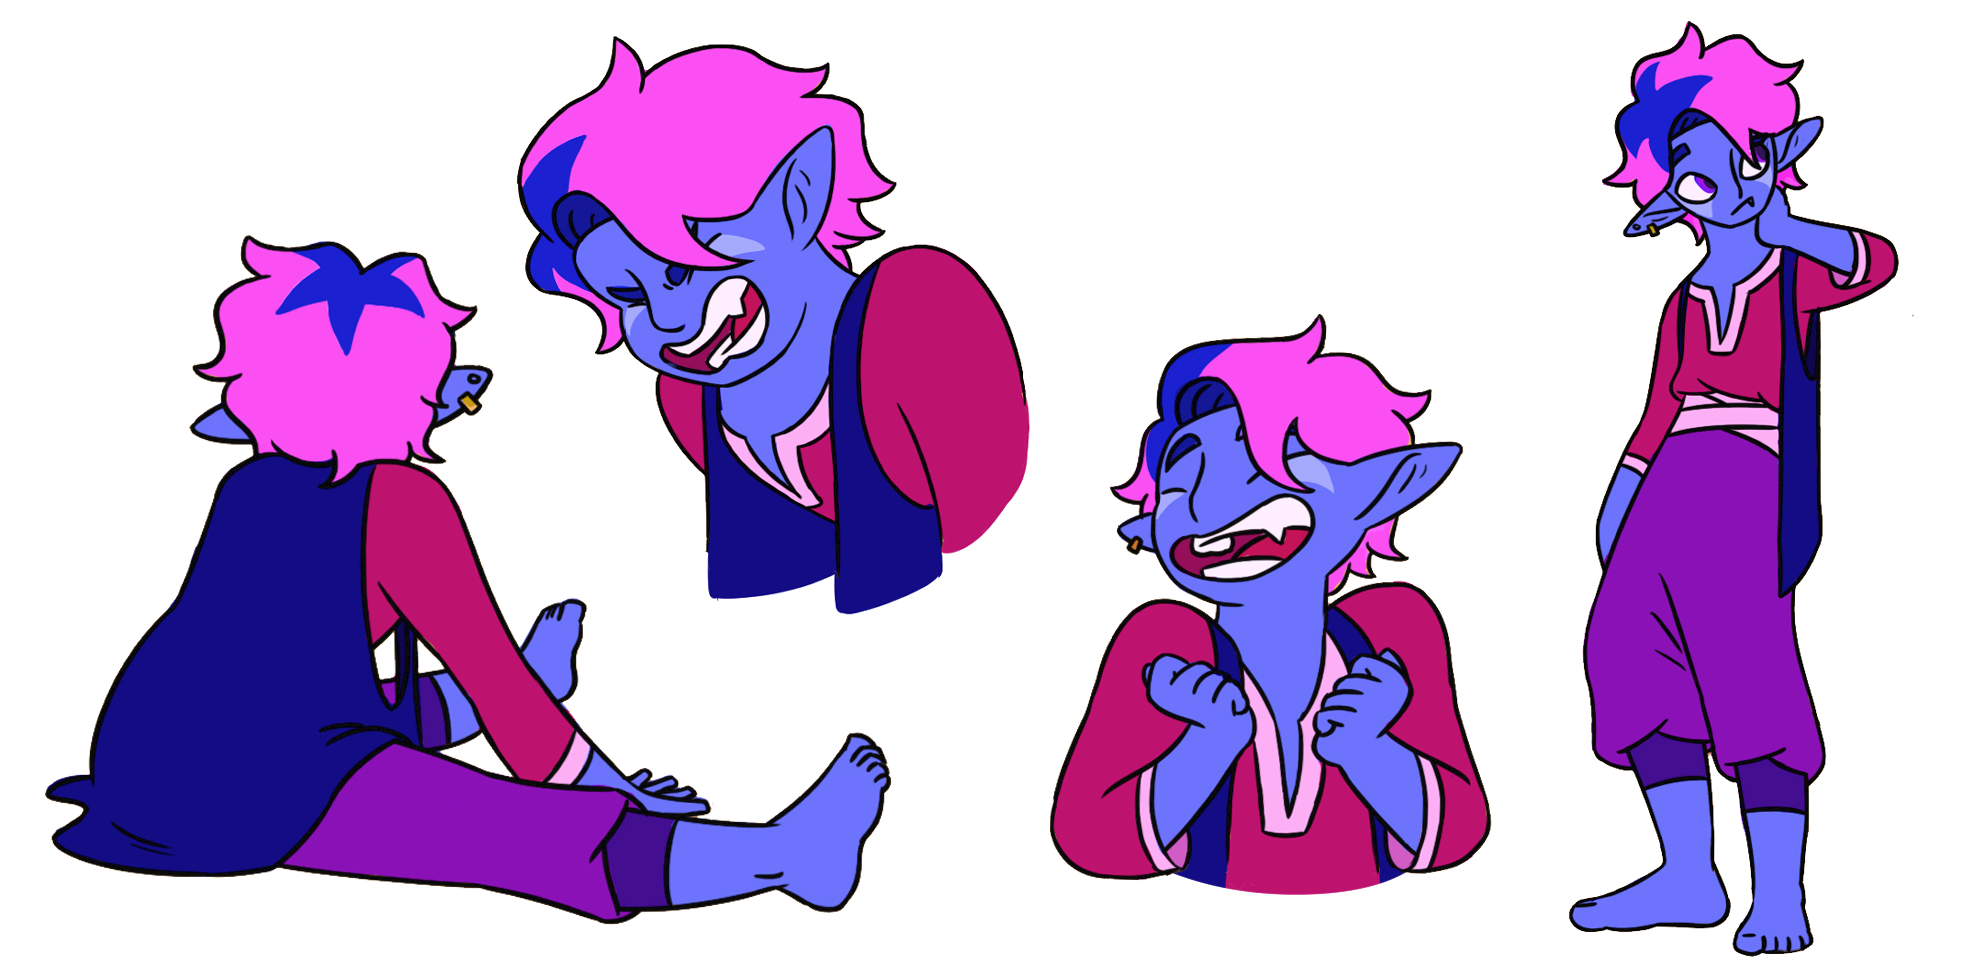 Character pose and expression sheet